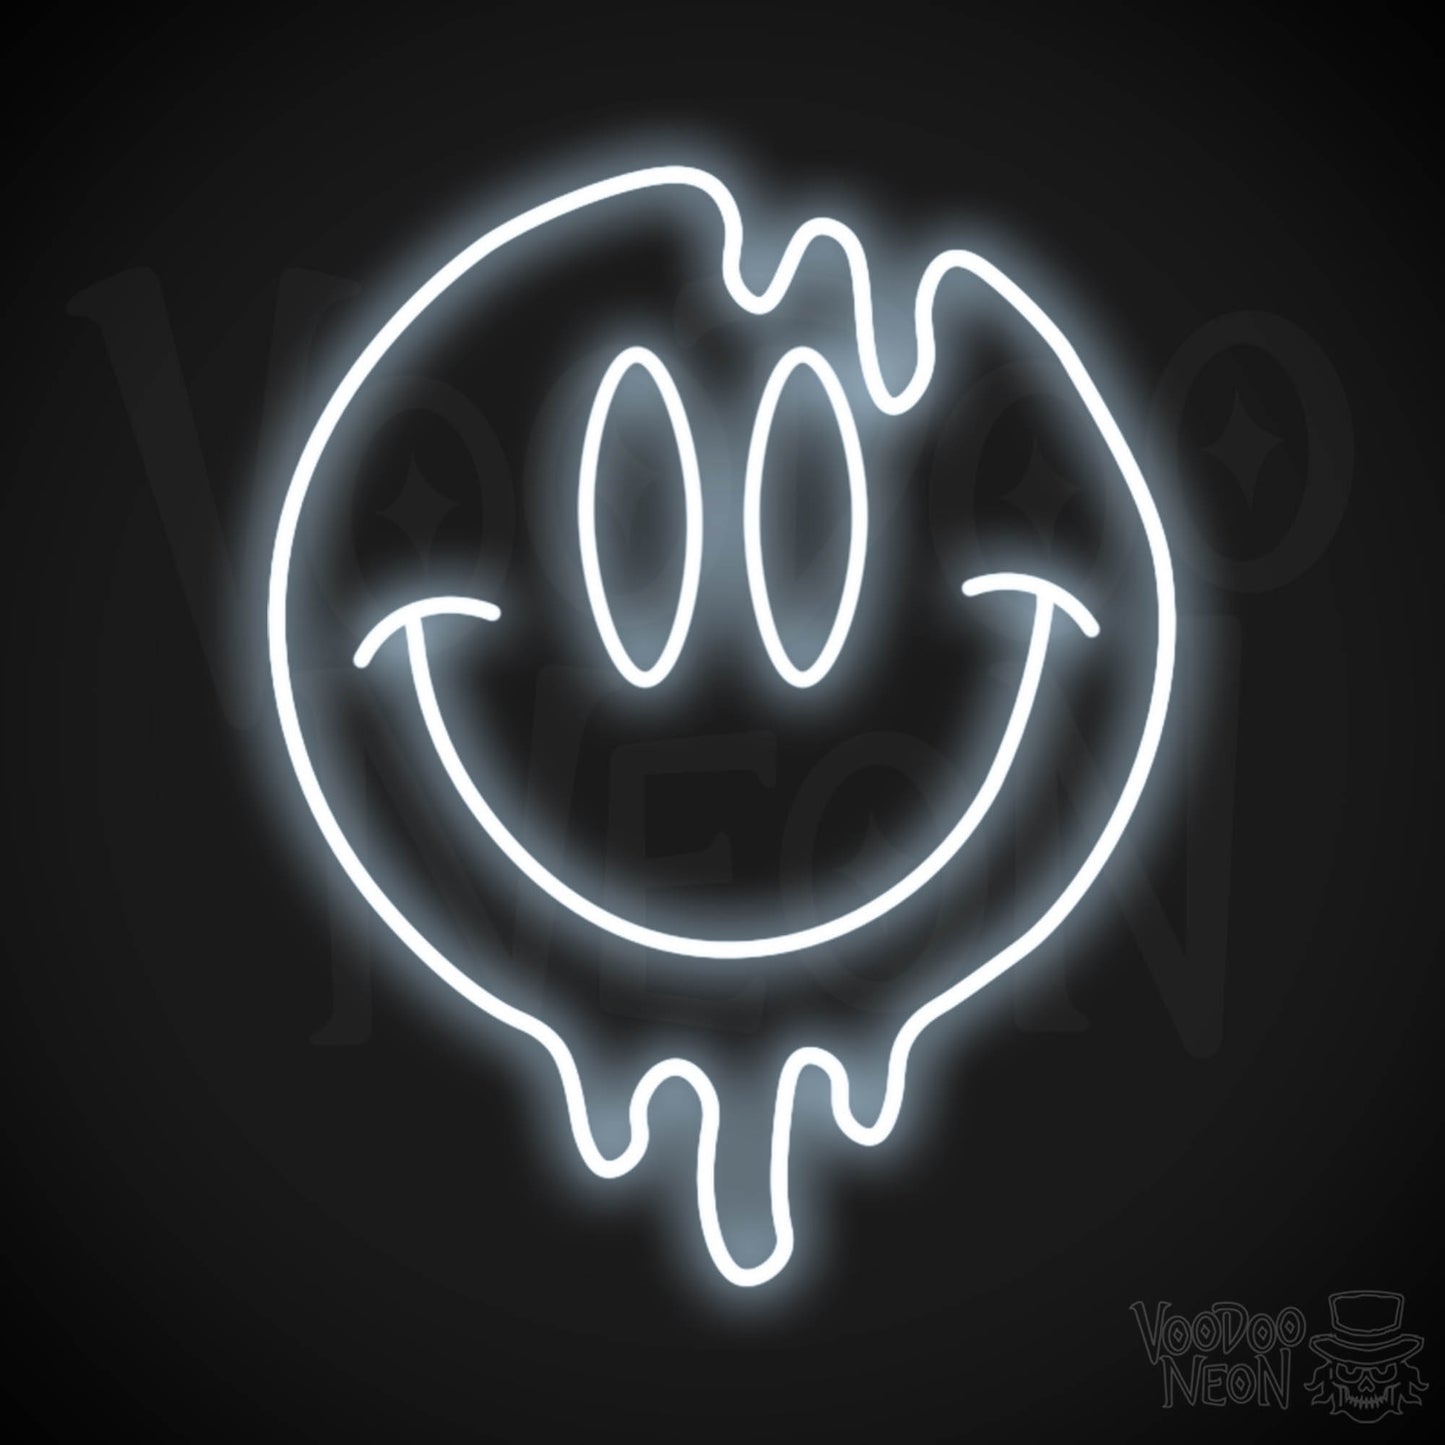 Smile Neon Sign - Neon Smile Sign - Neon Wall Art - Color Cool White